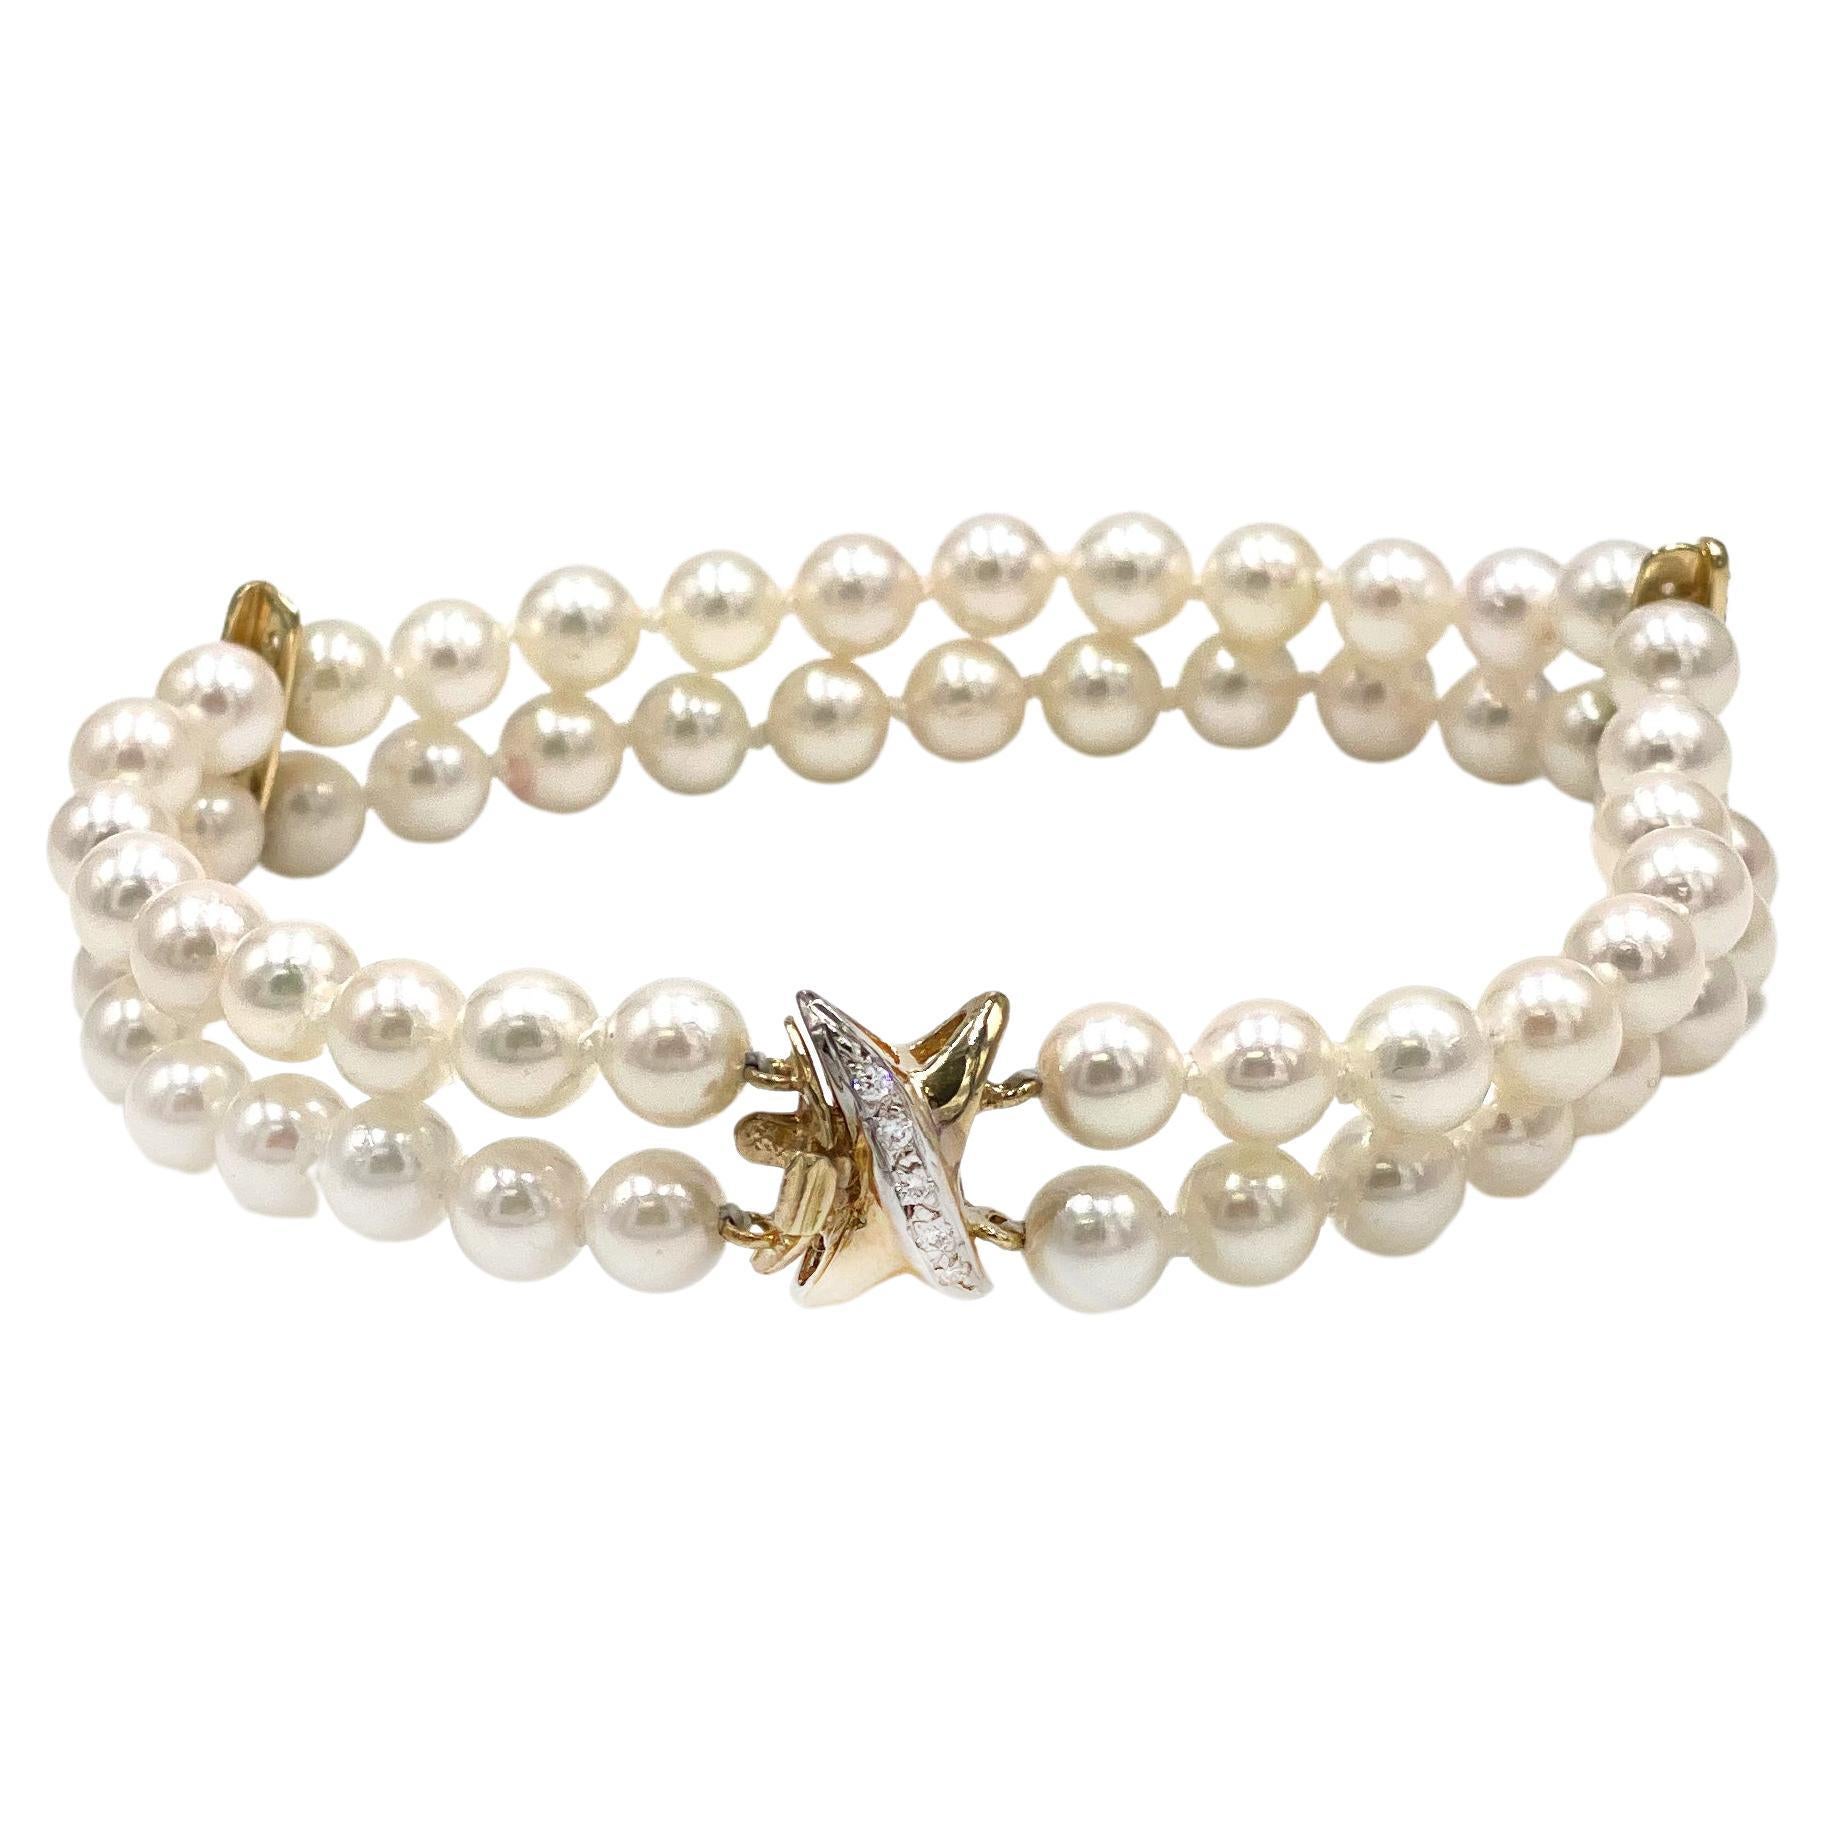 Double Strand Cultured Pearl Bracelet with 14K Yellow Gold X Clasp with Diamonds